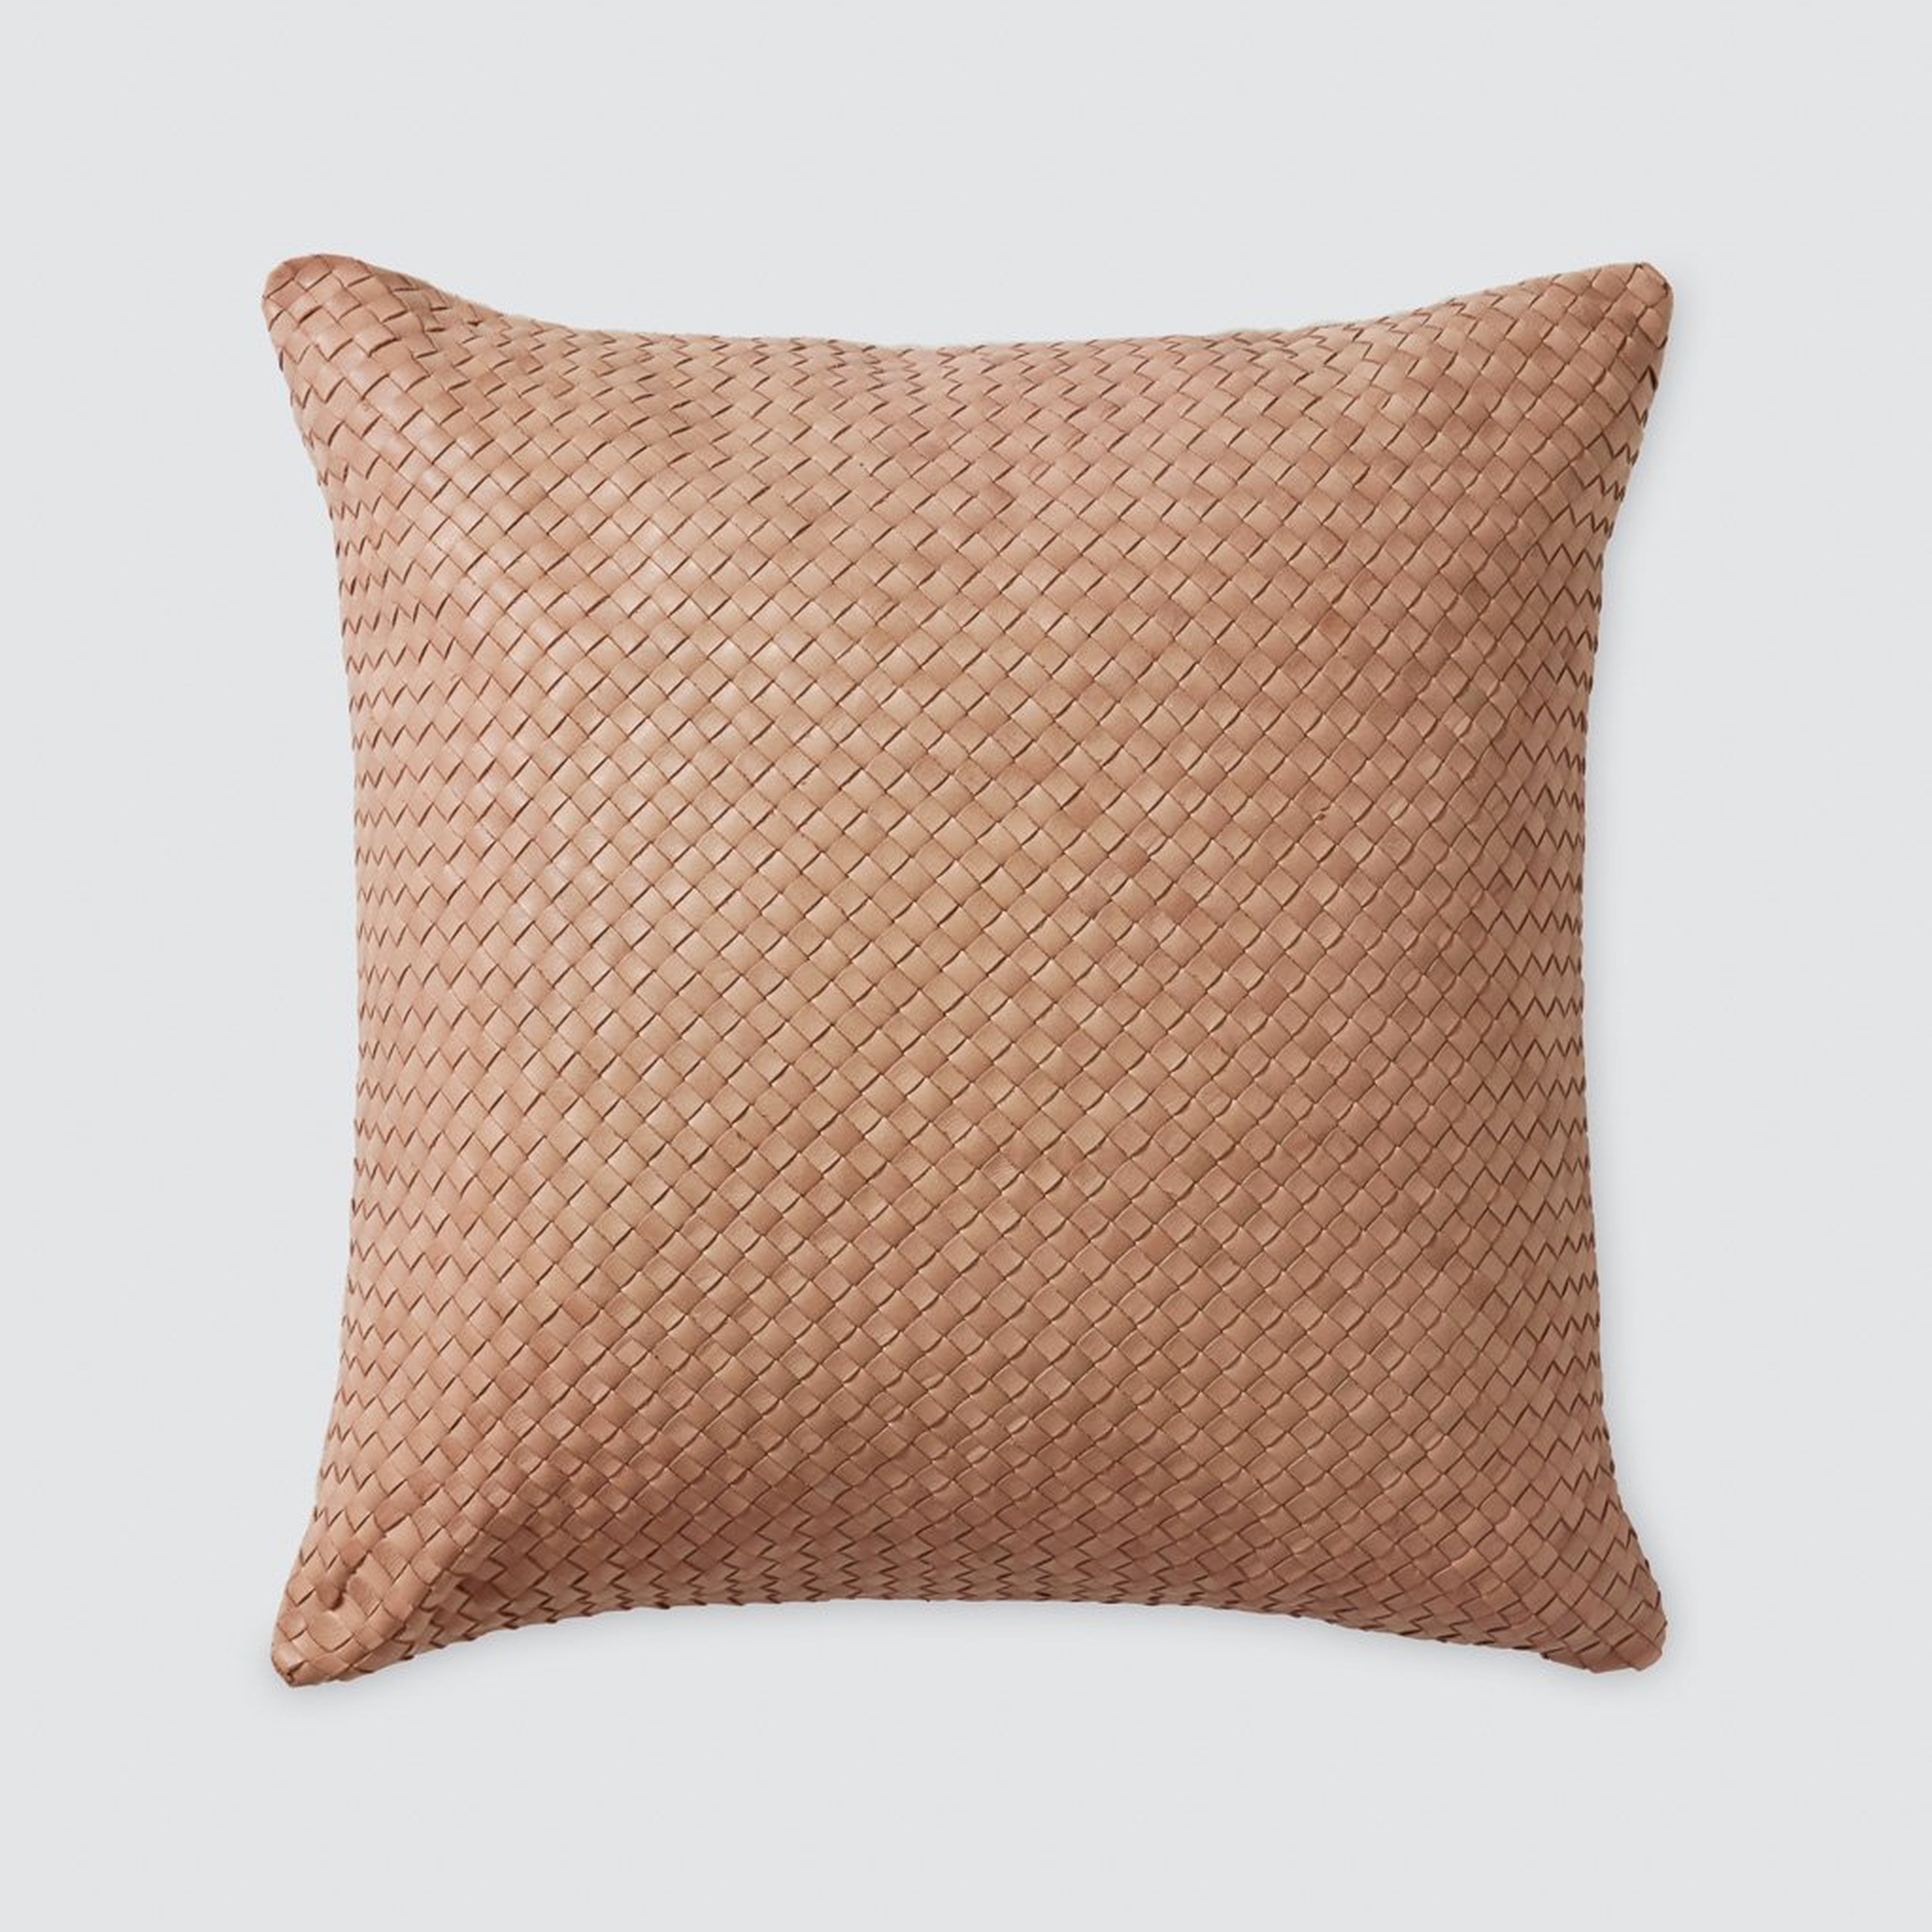 Dhara Leather Square Pillow - 18 in. x 18 in. By The Citizenry - The Citizenry